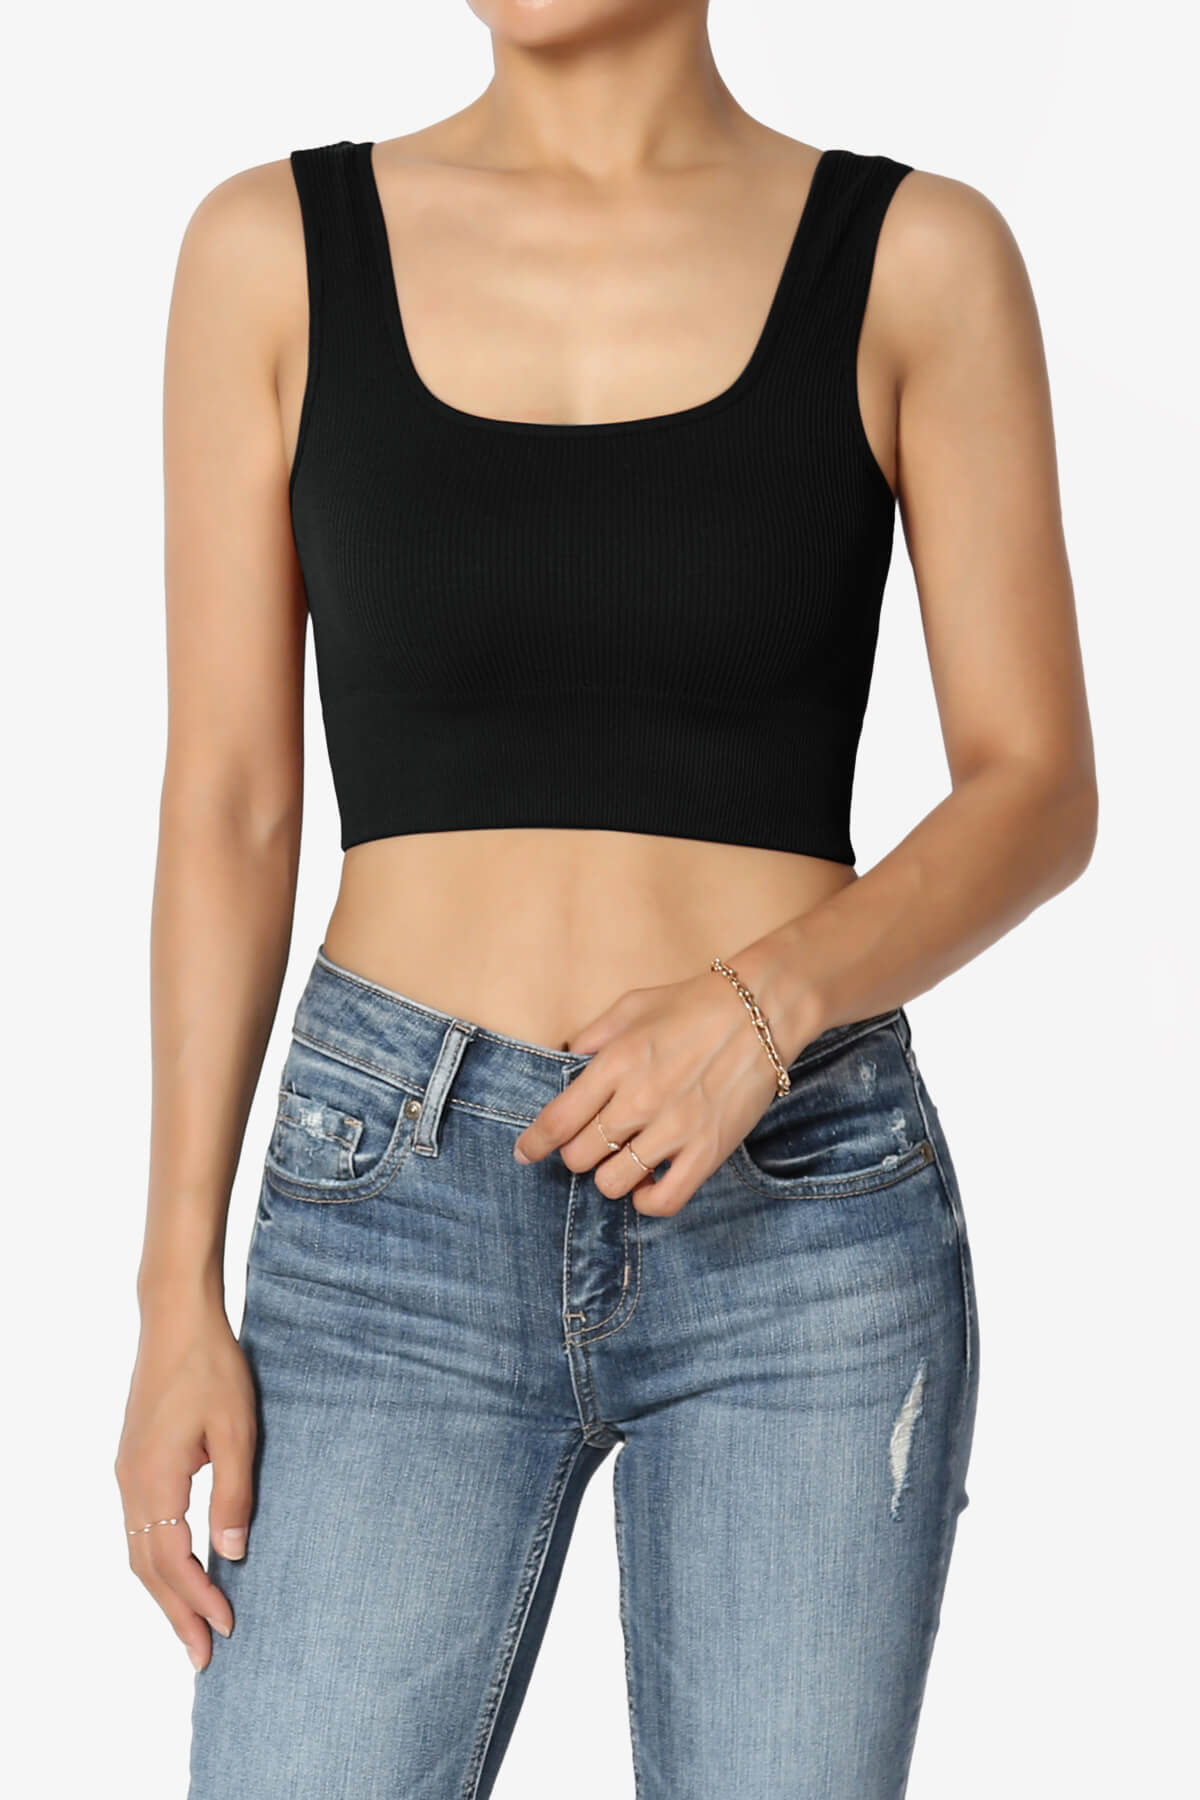 wannabemuse - Cropped layered square neck top, inner strap, Sleeveless,  diagonal, unbuttoned cap, built-in cap, square bra top, sleeveless tube top,  two-way wangbbong, Sleeveless strap, tank top, 3col - Codibook.